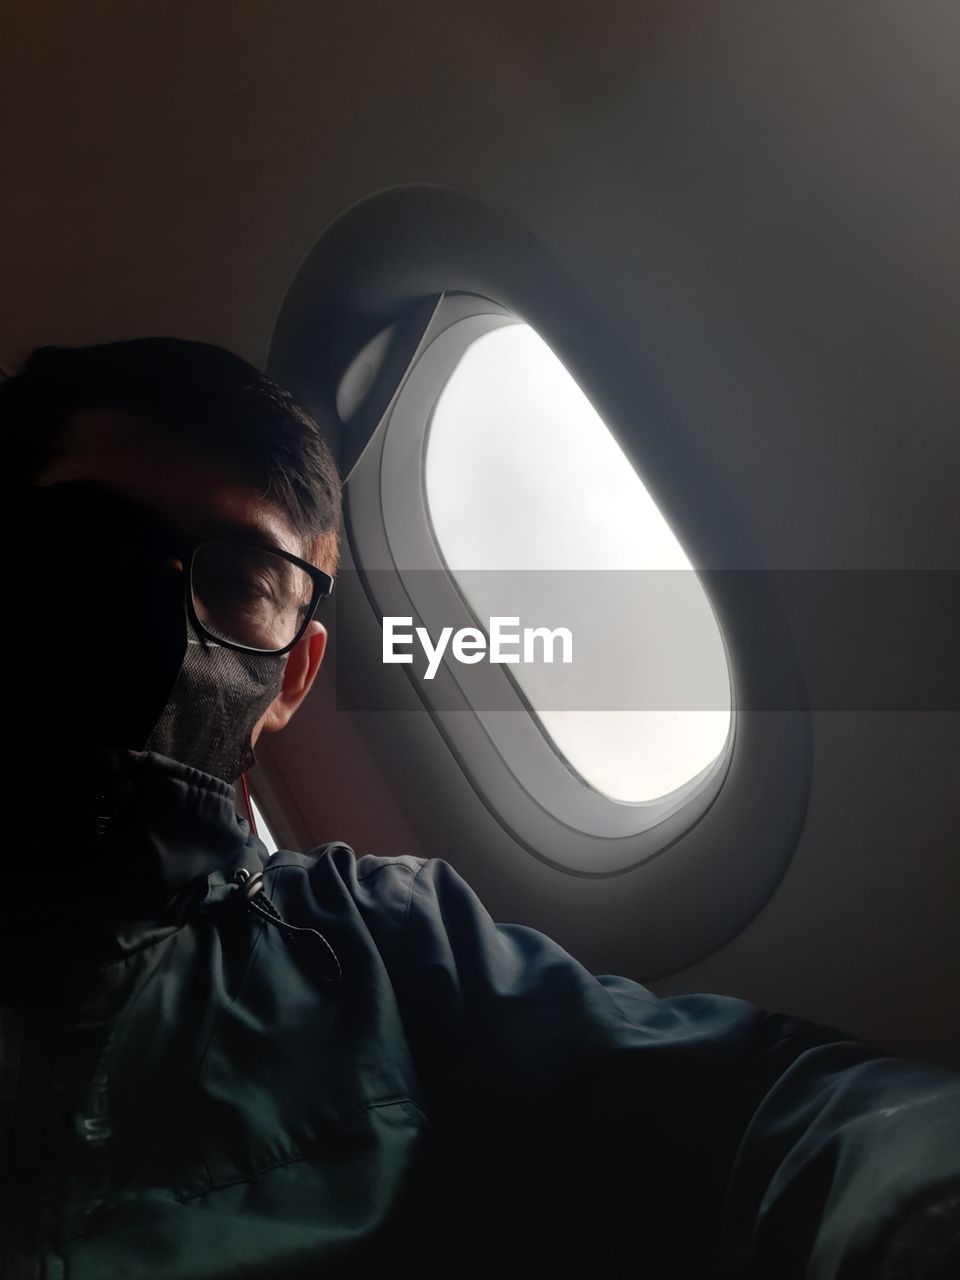 darkness, light, one person, mode of transportation, transportation, black, adult, air vehicle, airplane, indoors, travel, vehicle interior, journey, portrait, screenshot, person, young adult